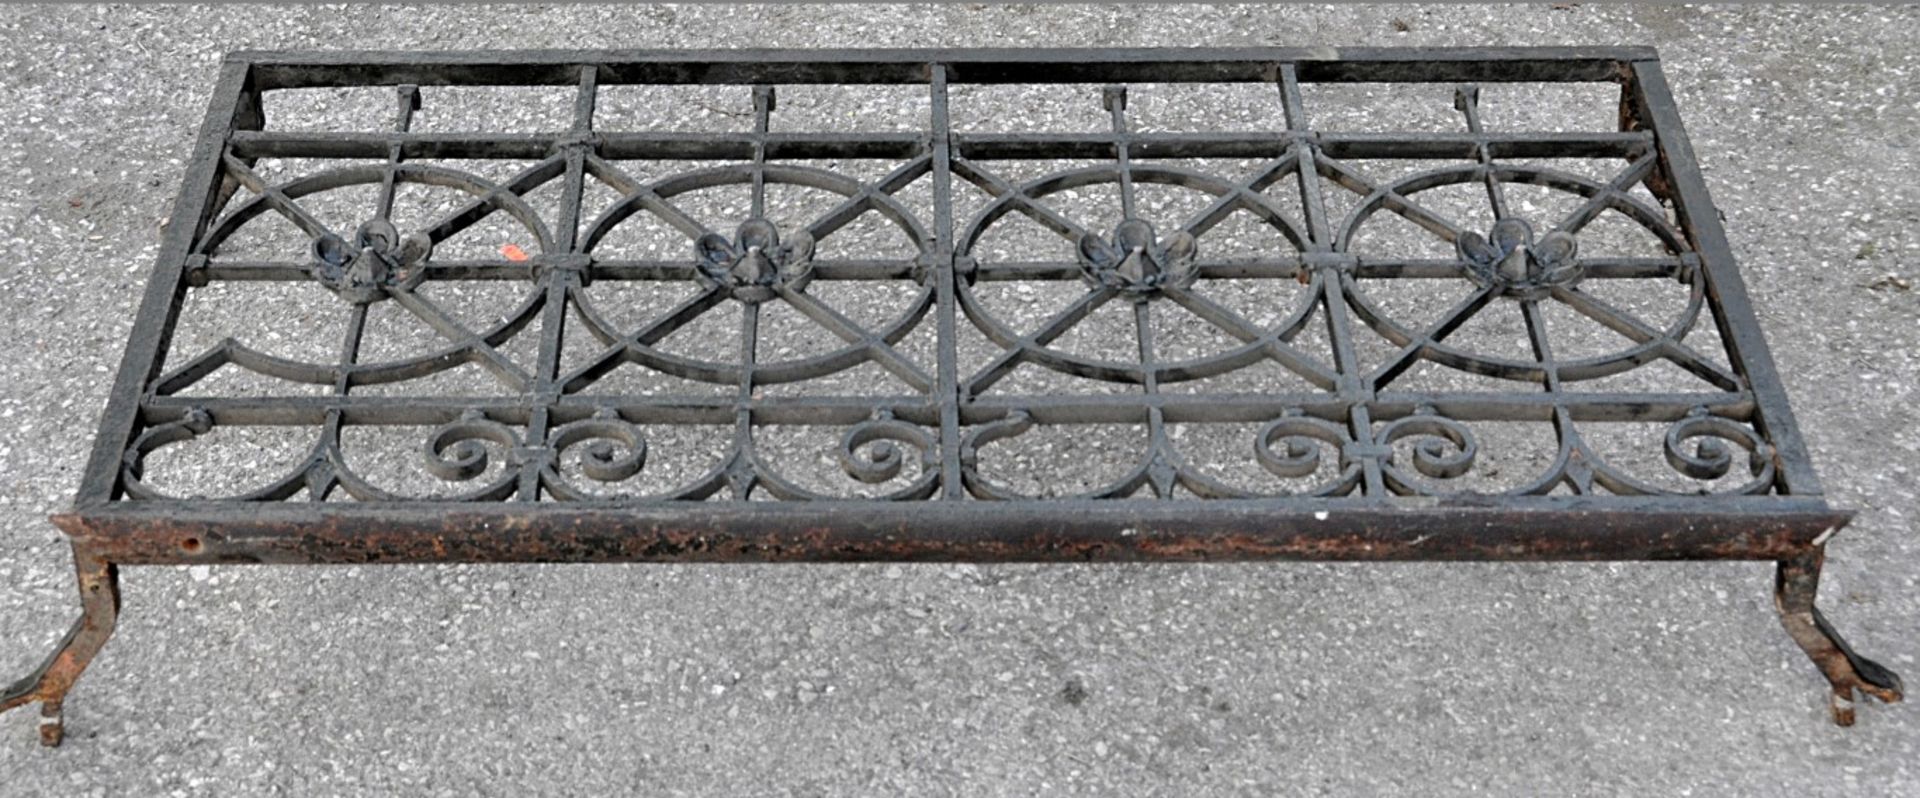 1 x Reclaimed Cast Iron Window Guard – Size To Follow - See Pictures - Ref : LON23 – CL105 - - Image 4 of 4